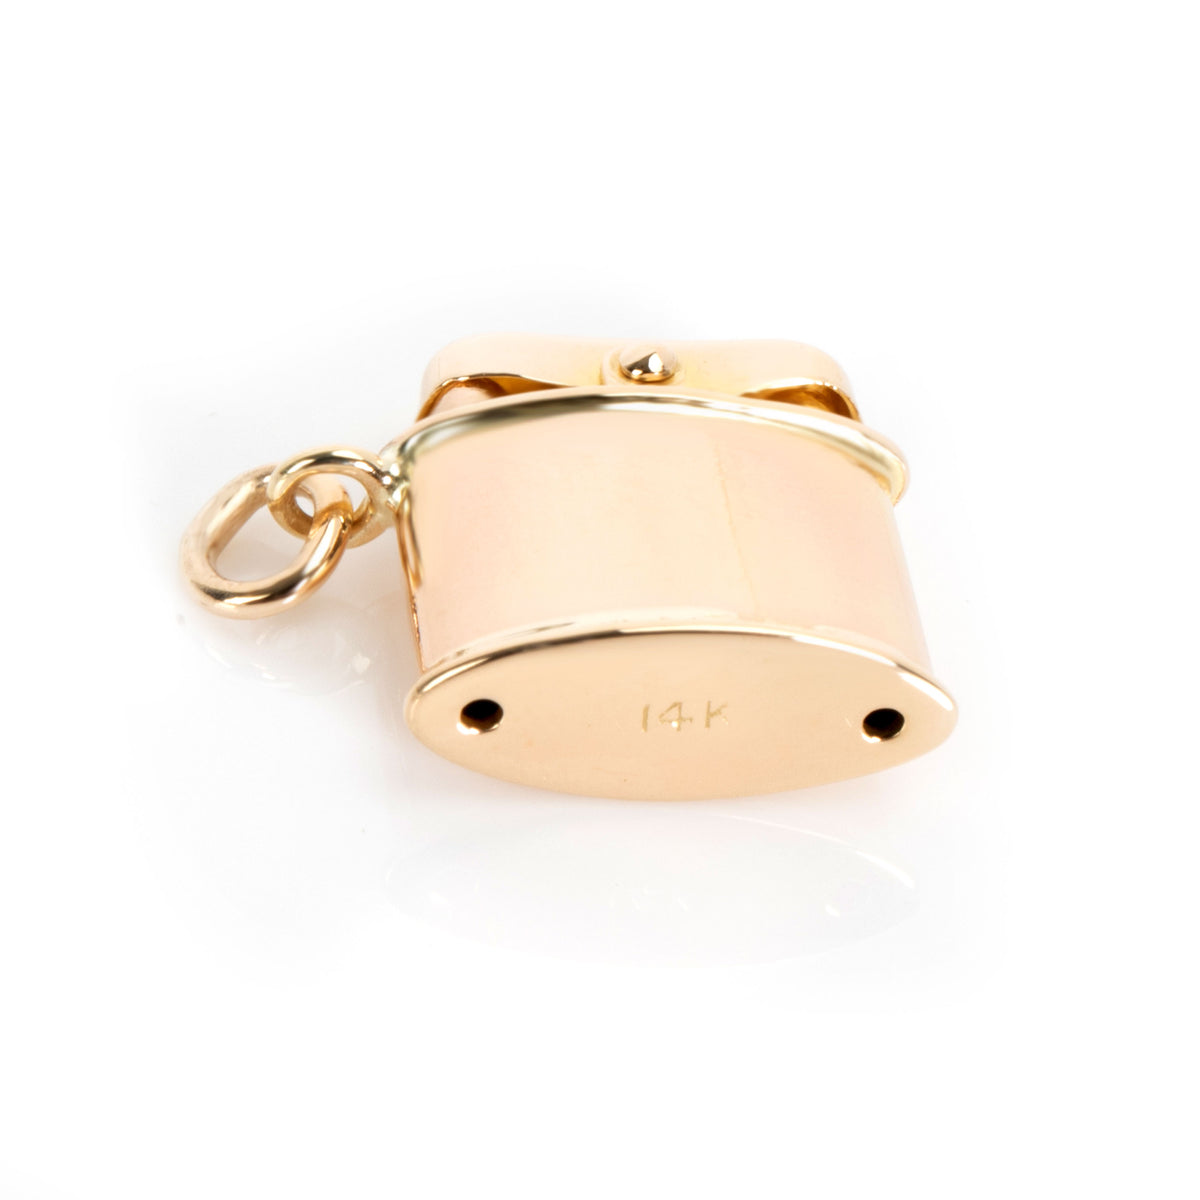 Vintage Lighter Charm in 14K Yellow Gold